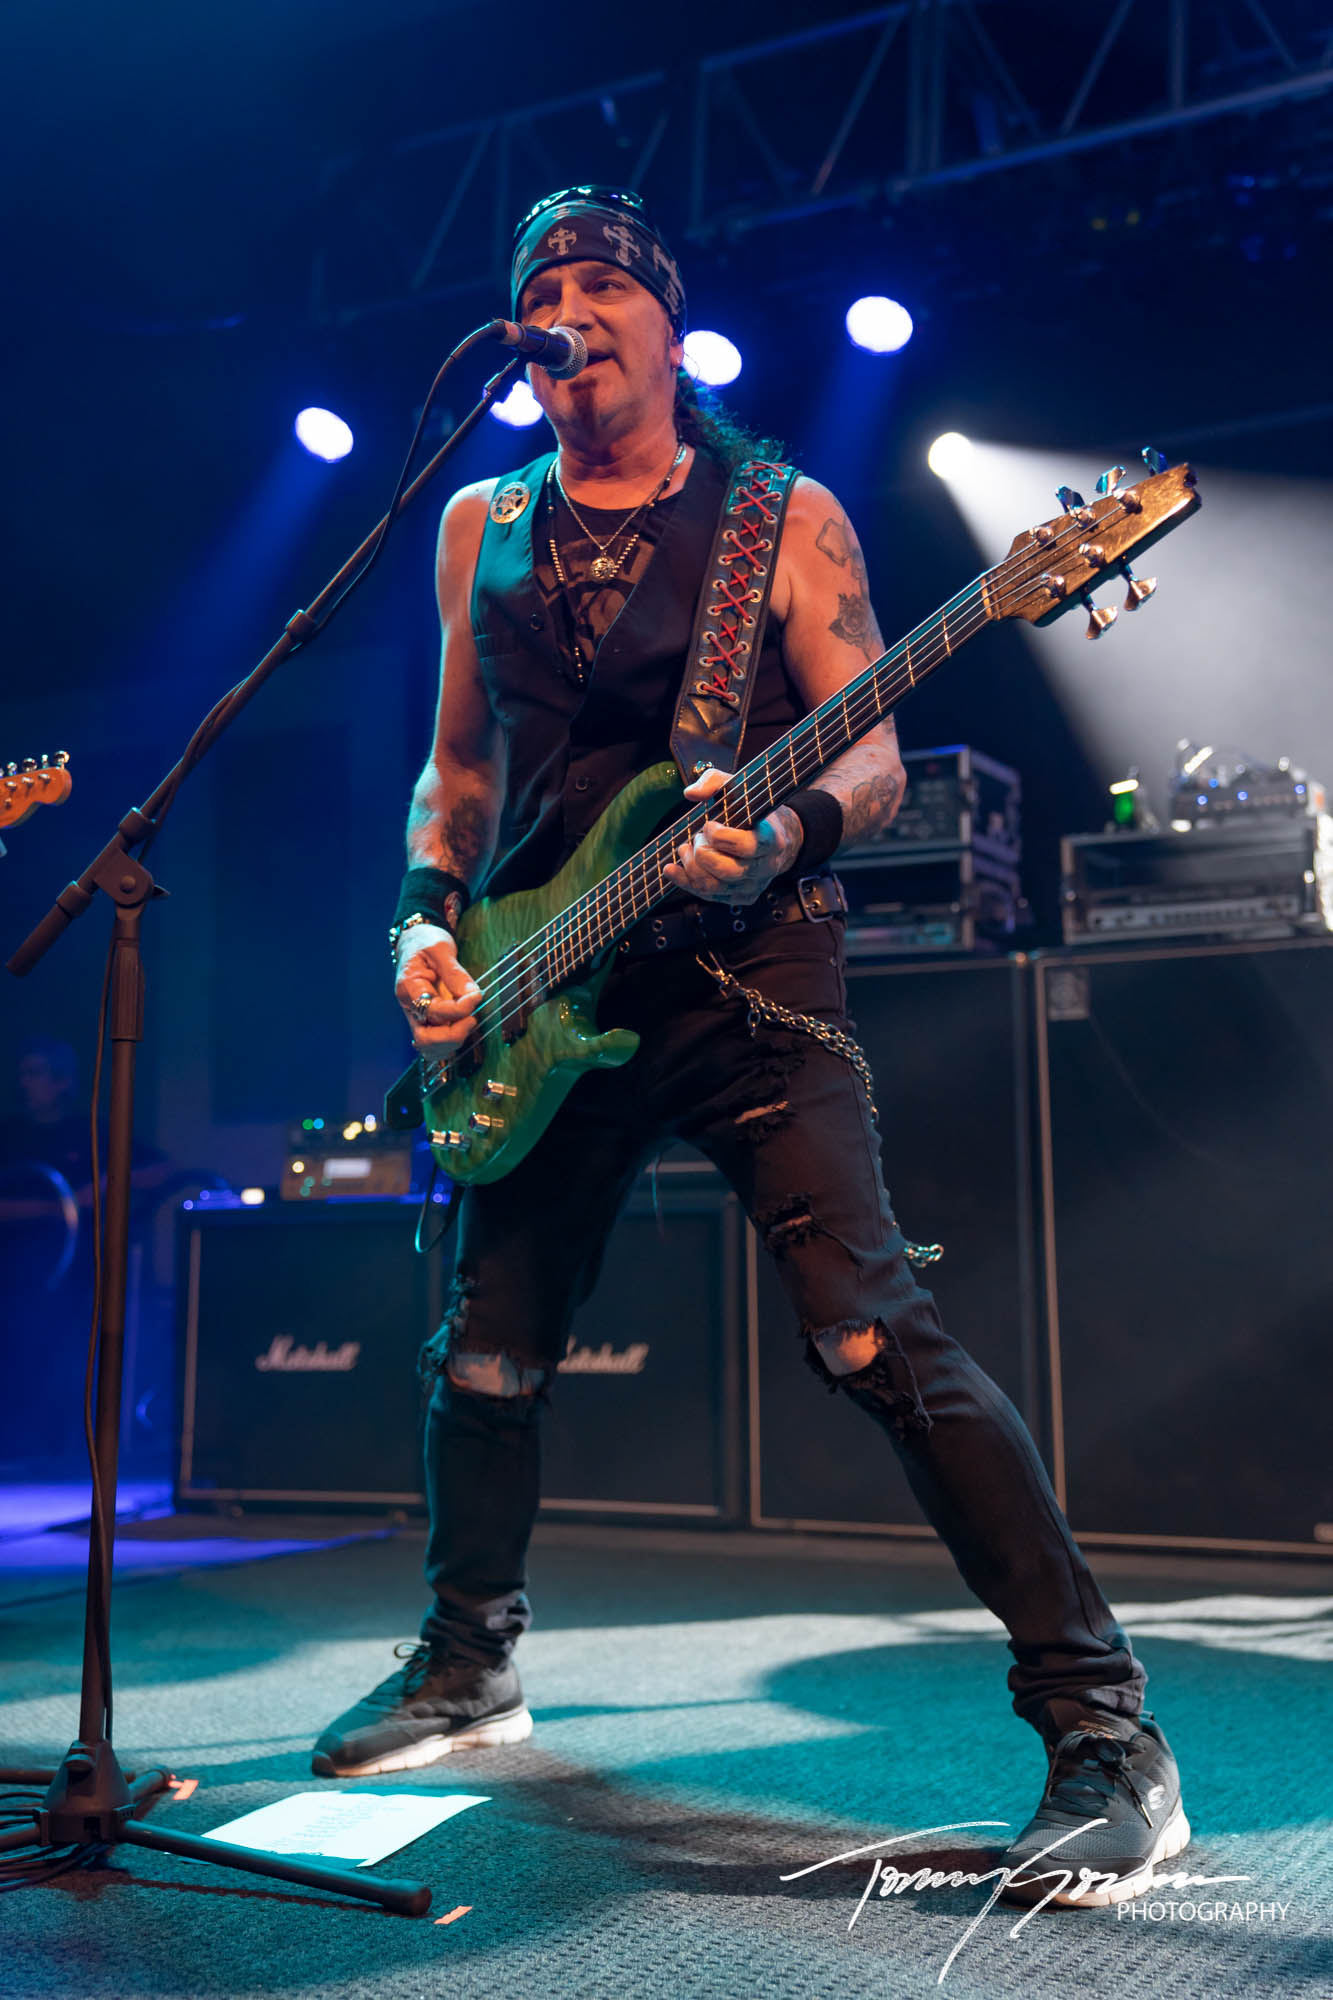 LIVE REVIEW: Great White and Slaughter - Grand Casino Hinckley, Hinckley, MN - The Rockpit 1340x2000